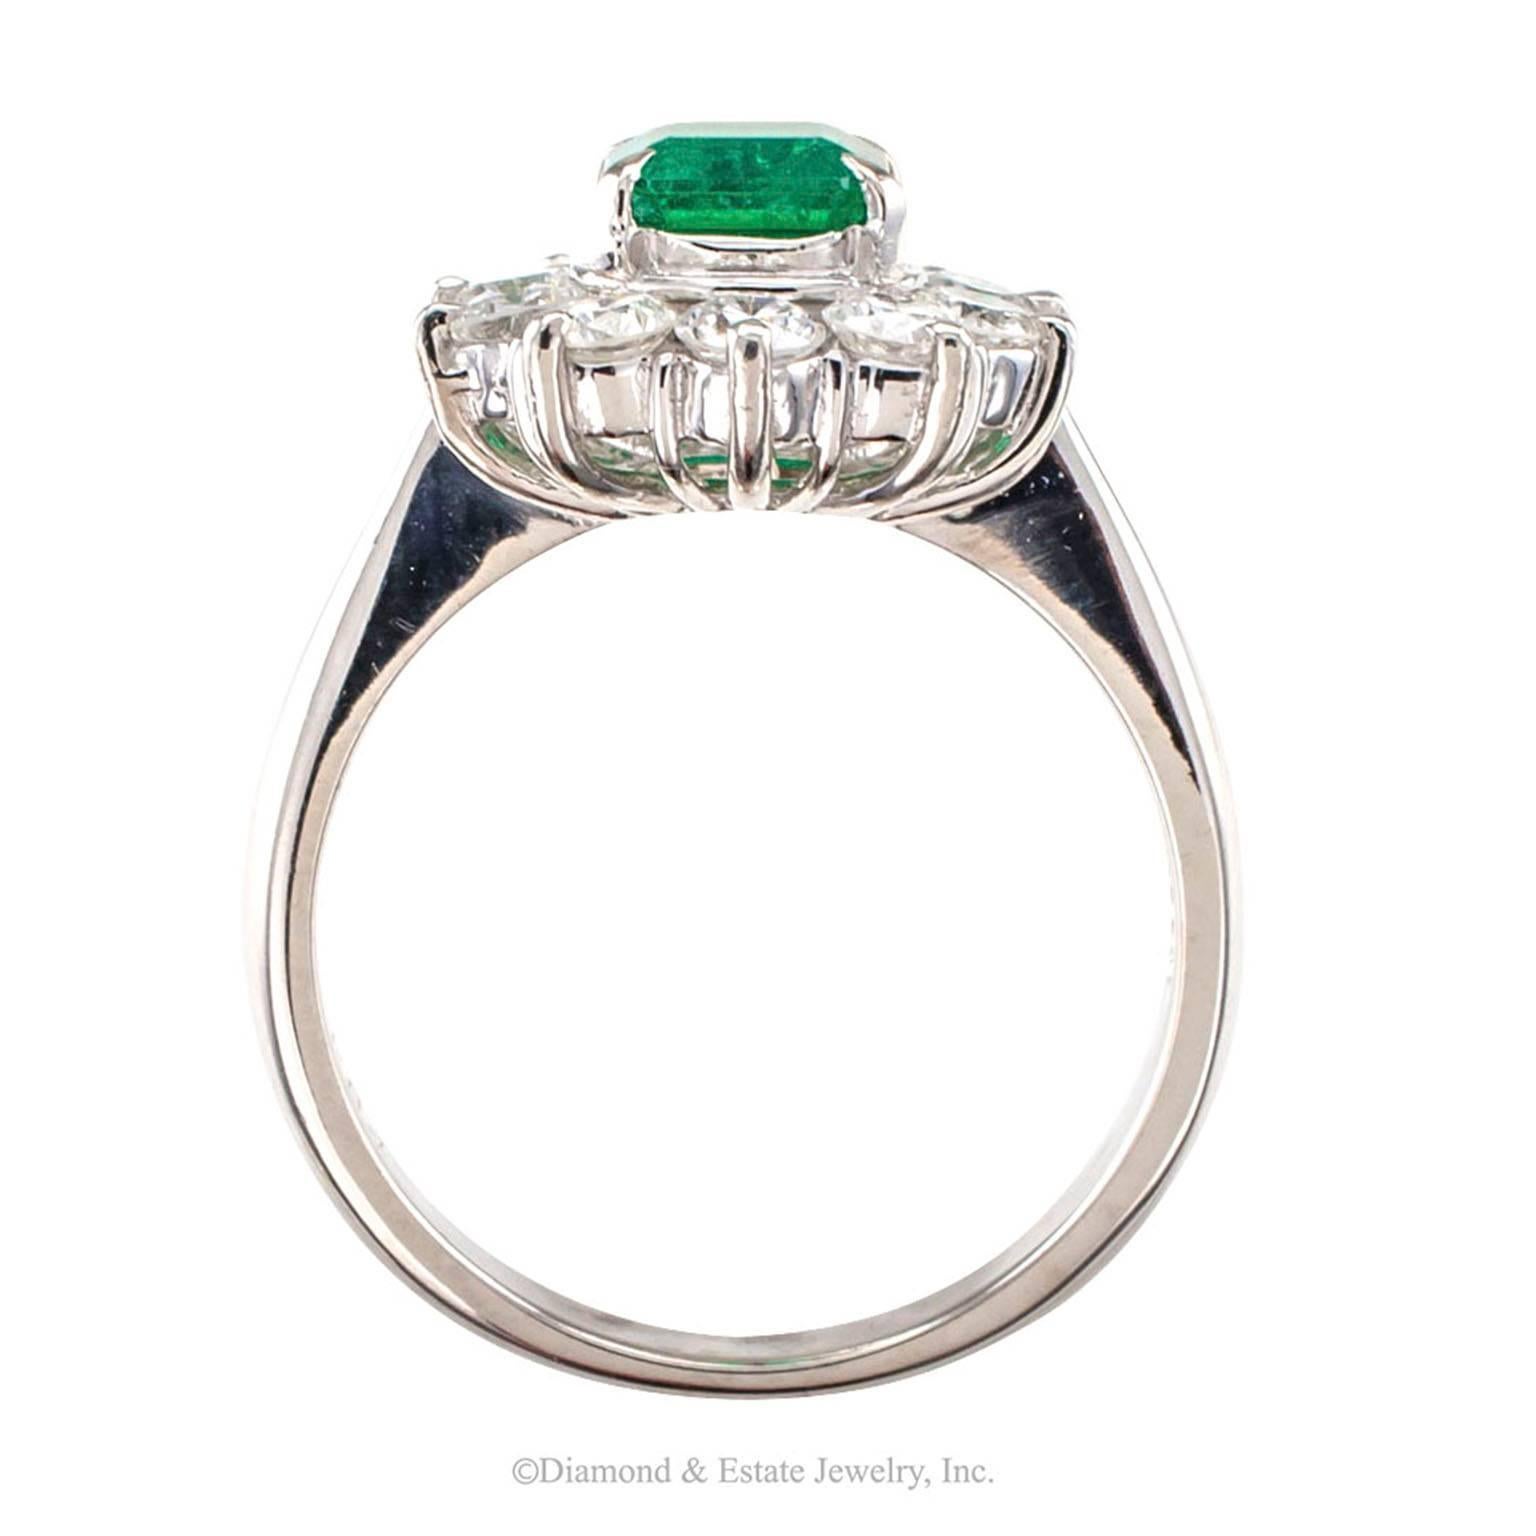 Emerald and diamond cluster ring circa 1990. *

ABOUT THIS ITEM:  #A7426. Scroll down for detailed specifications.  The Colombian emerald shows a beautiful deep green color and the diamonds have been matched for color and cut, set in a mounting that